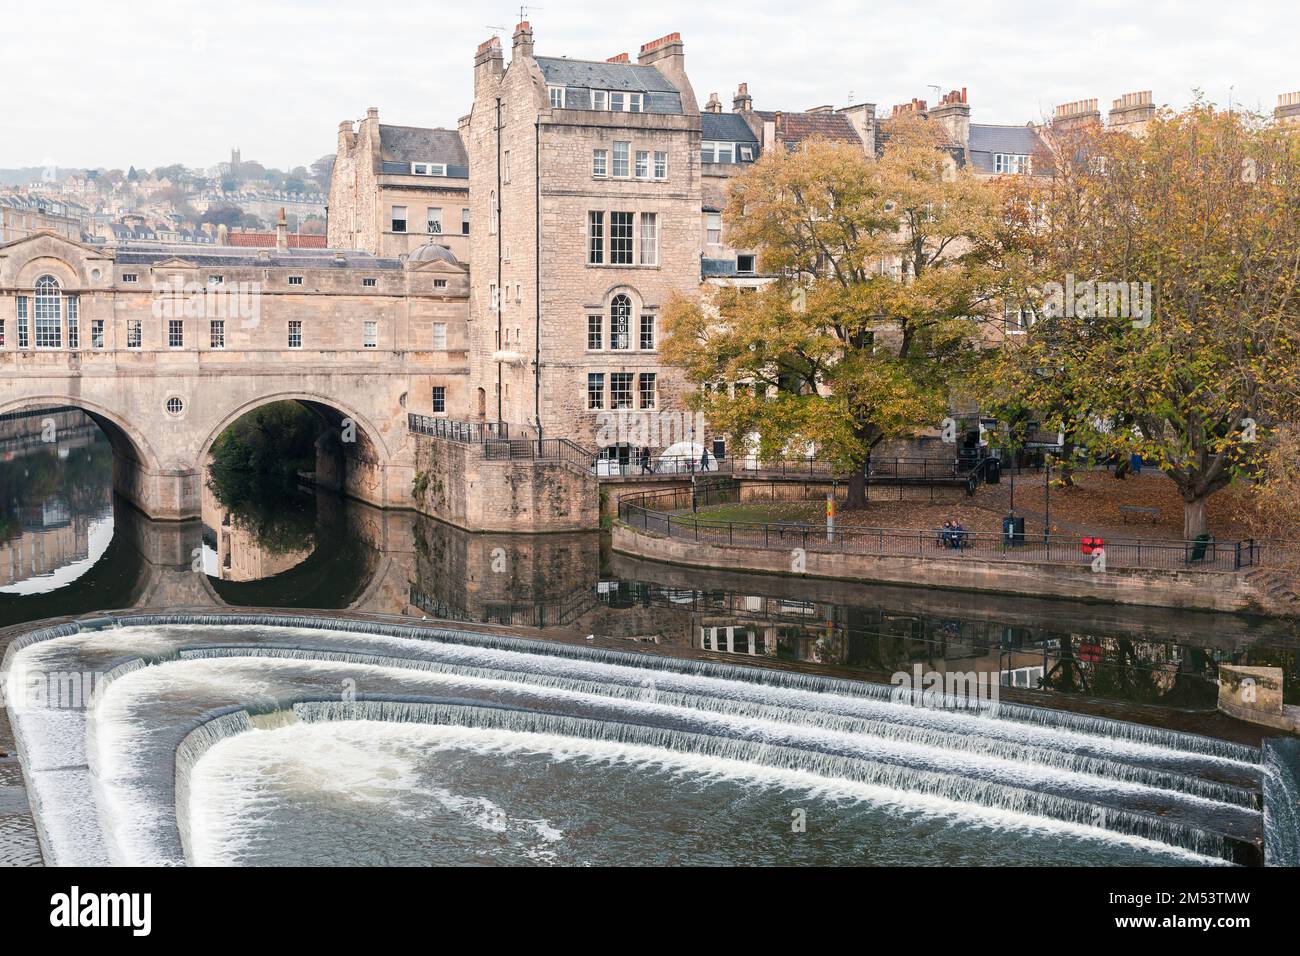 Bath, United Kingdom - November 3, 2017: Old town view with the 18th century Pulteney Bridge and waterfall Stock Photo